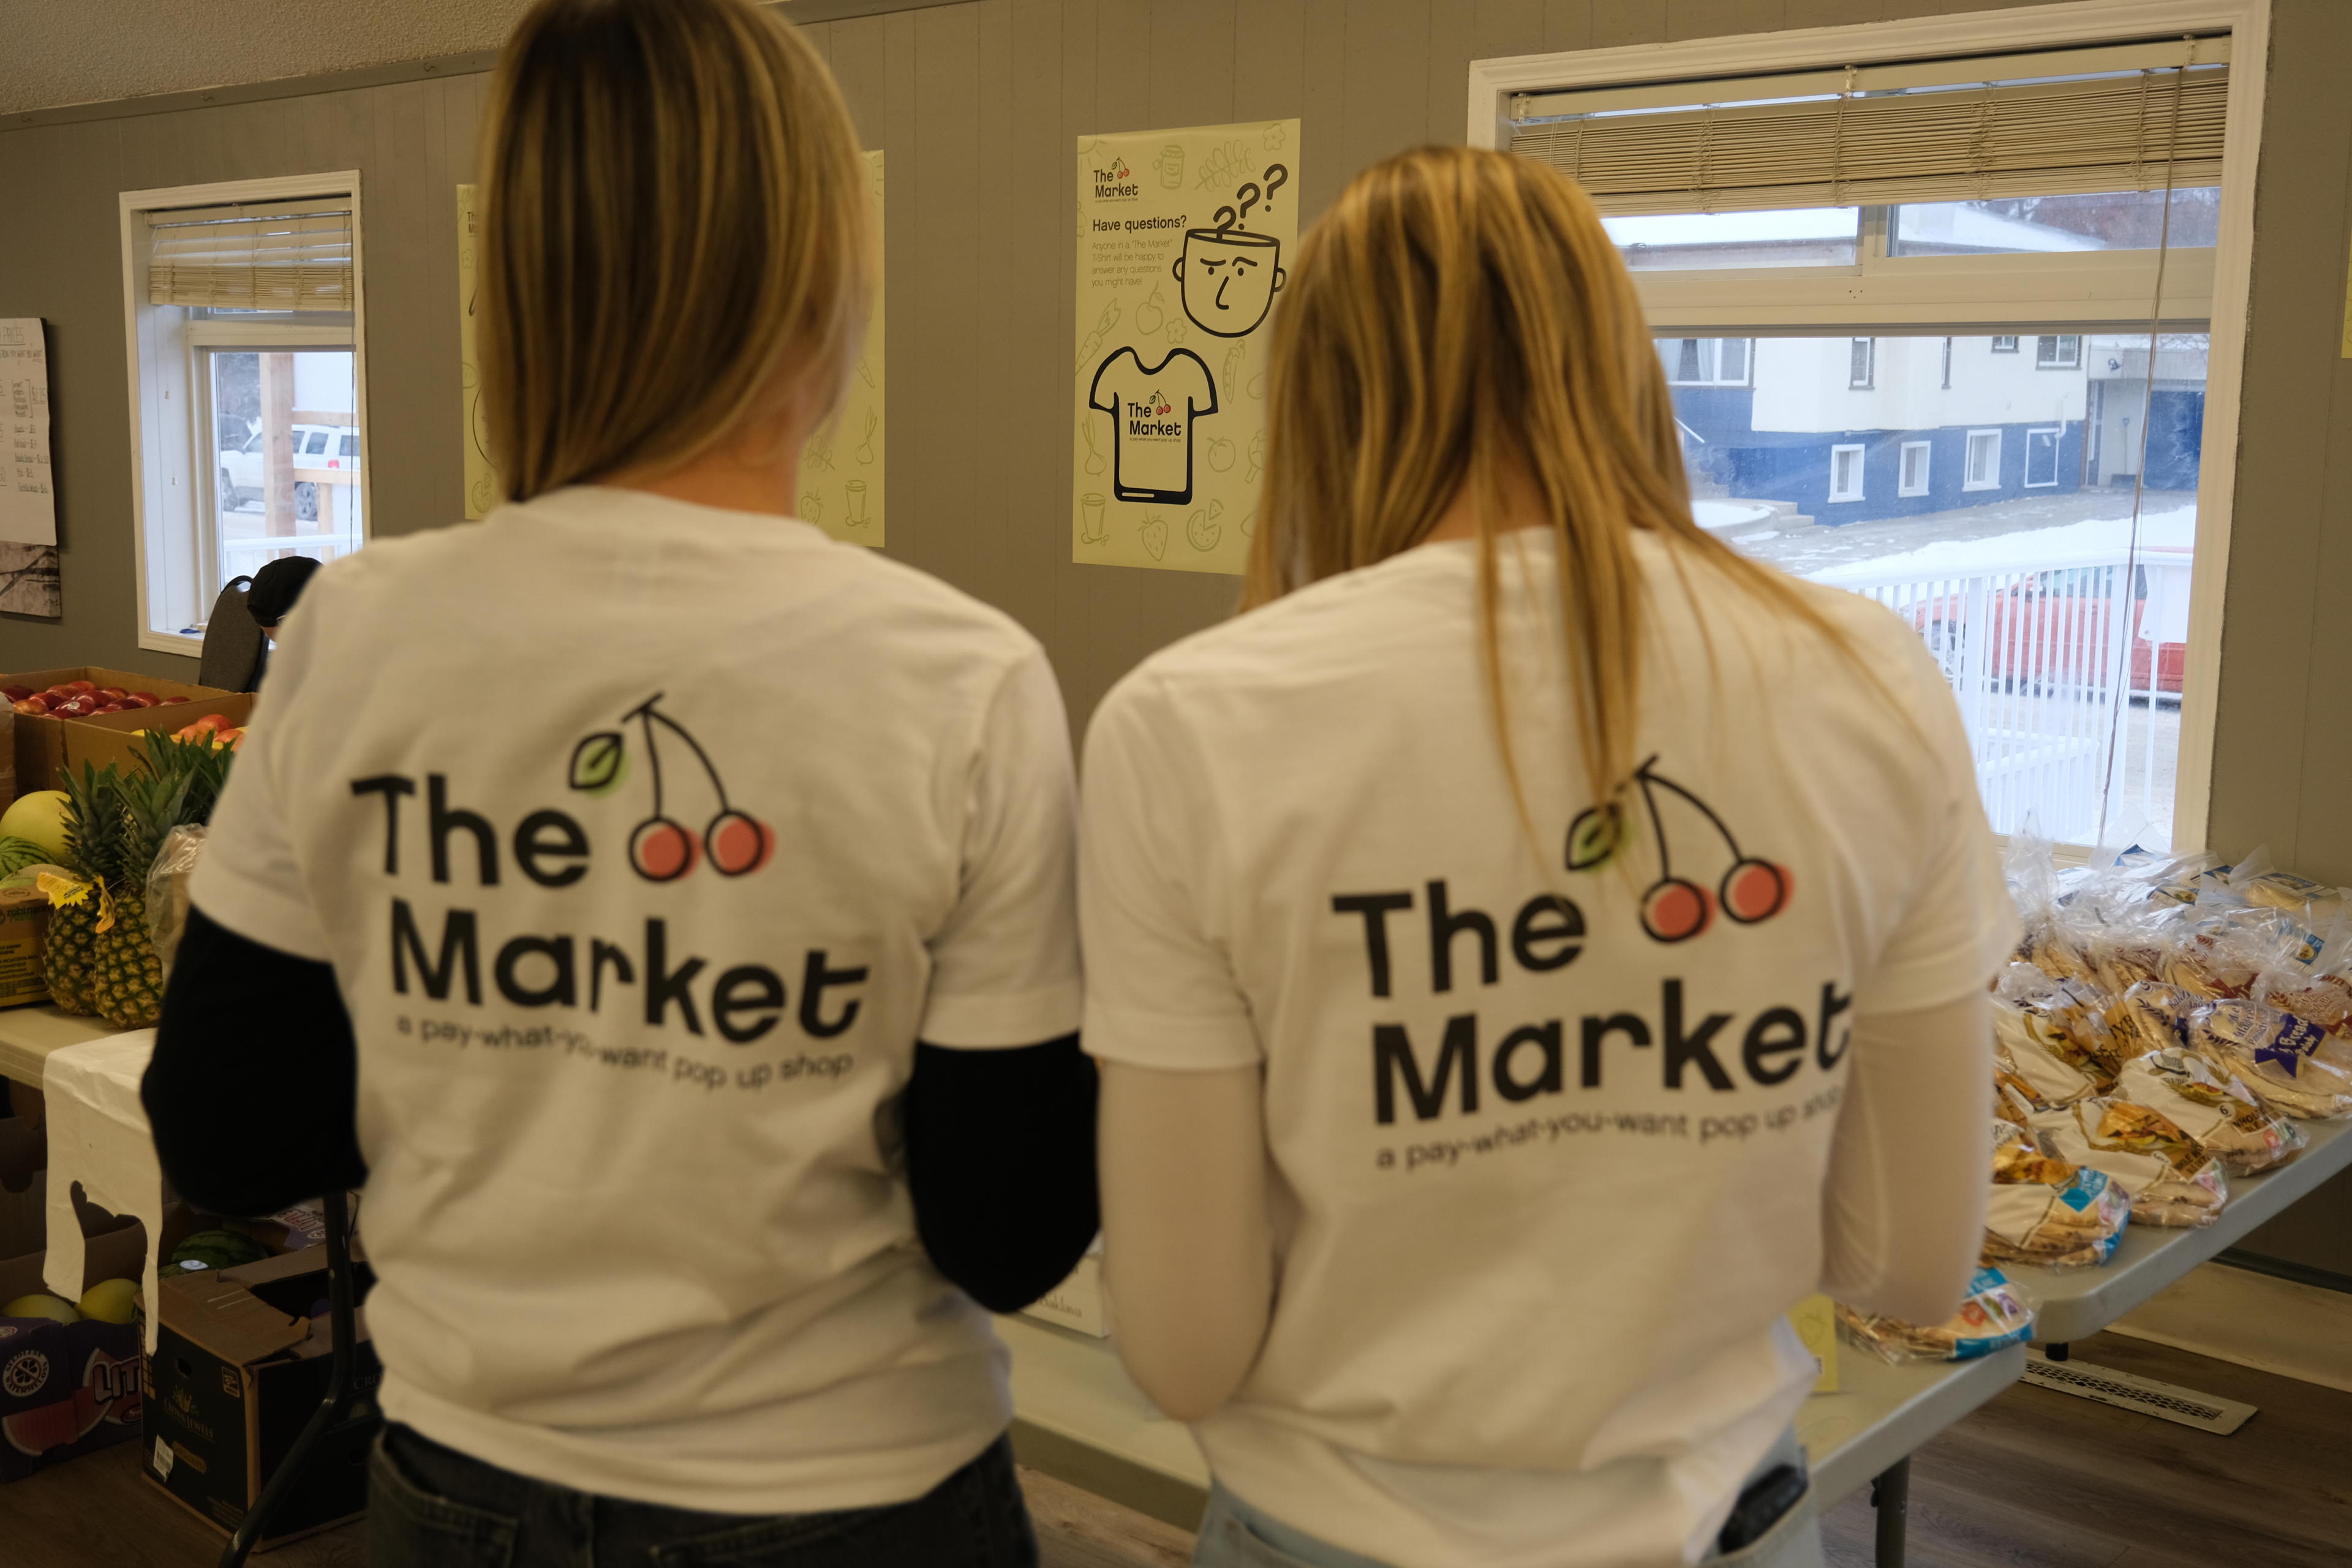 2 girls standing with their backs to the camera with matching shirts that say "The Market".